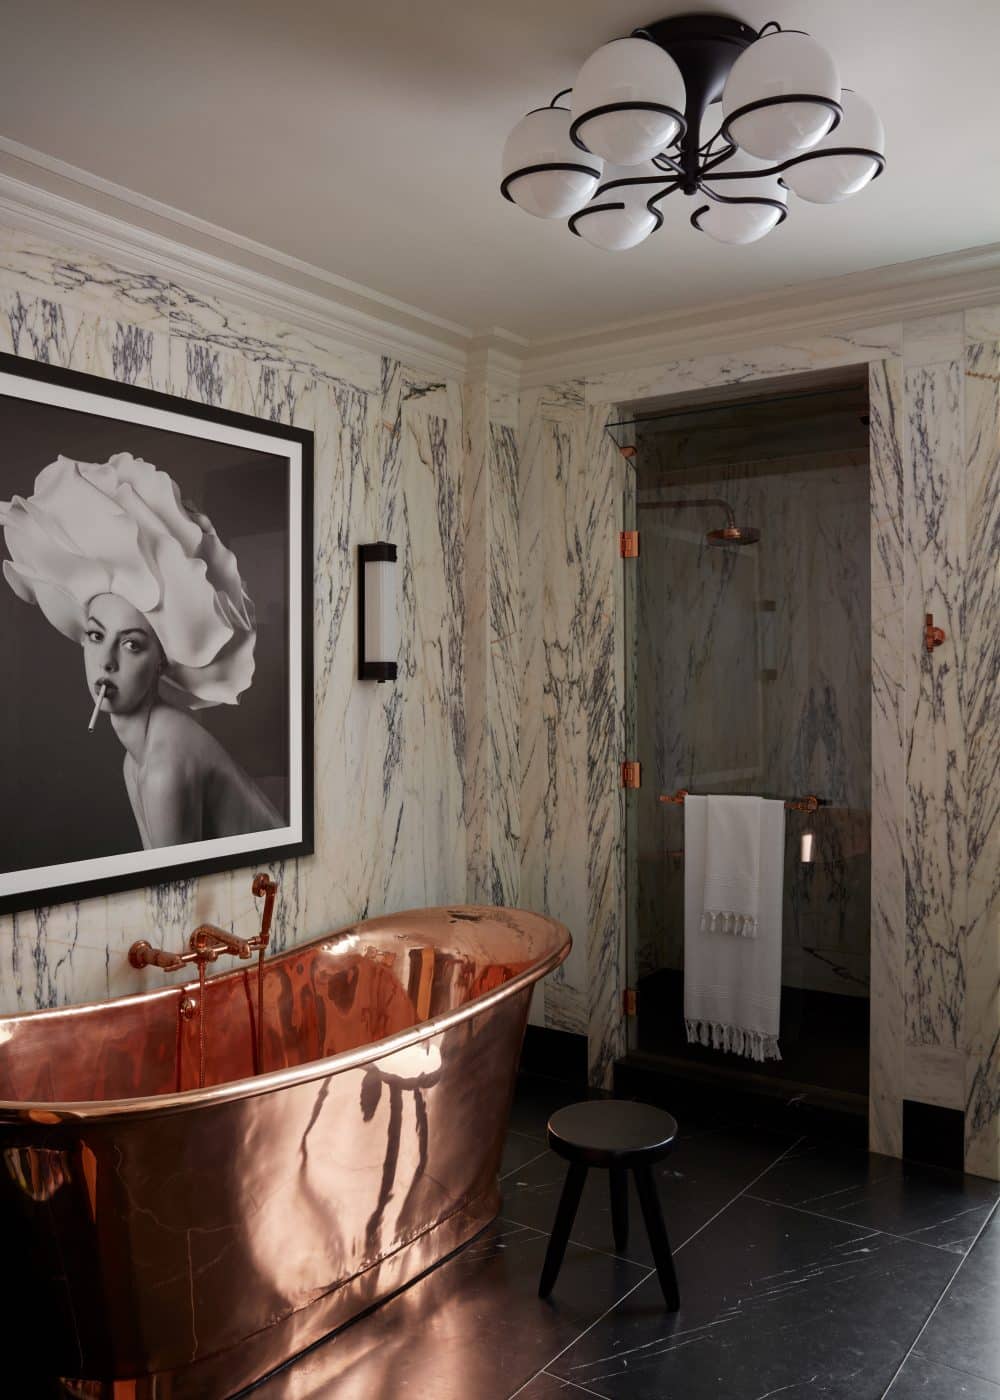 Primary bathroom of apartment in Fitzroy building in New York City by interior designer Shawn Henderson